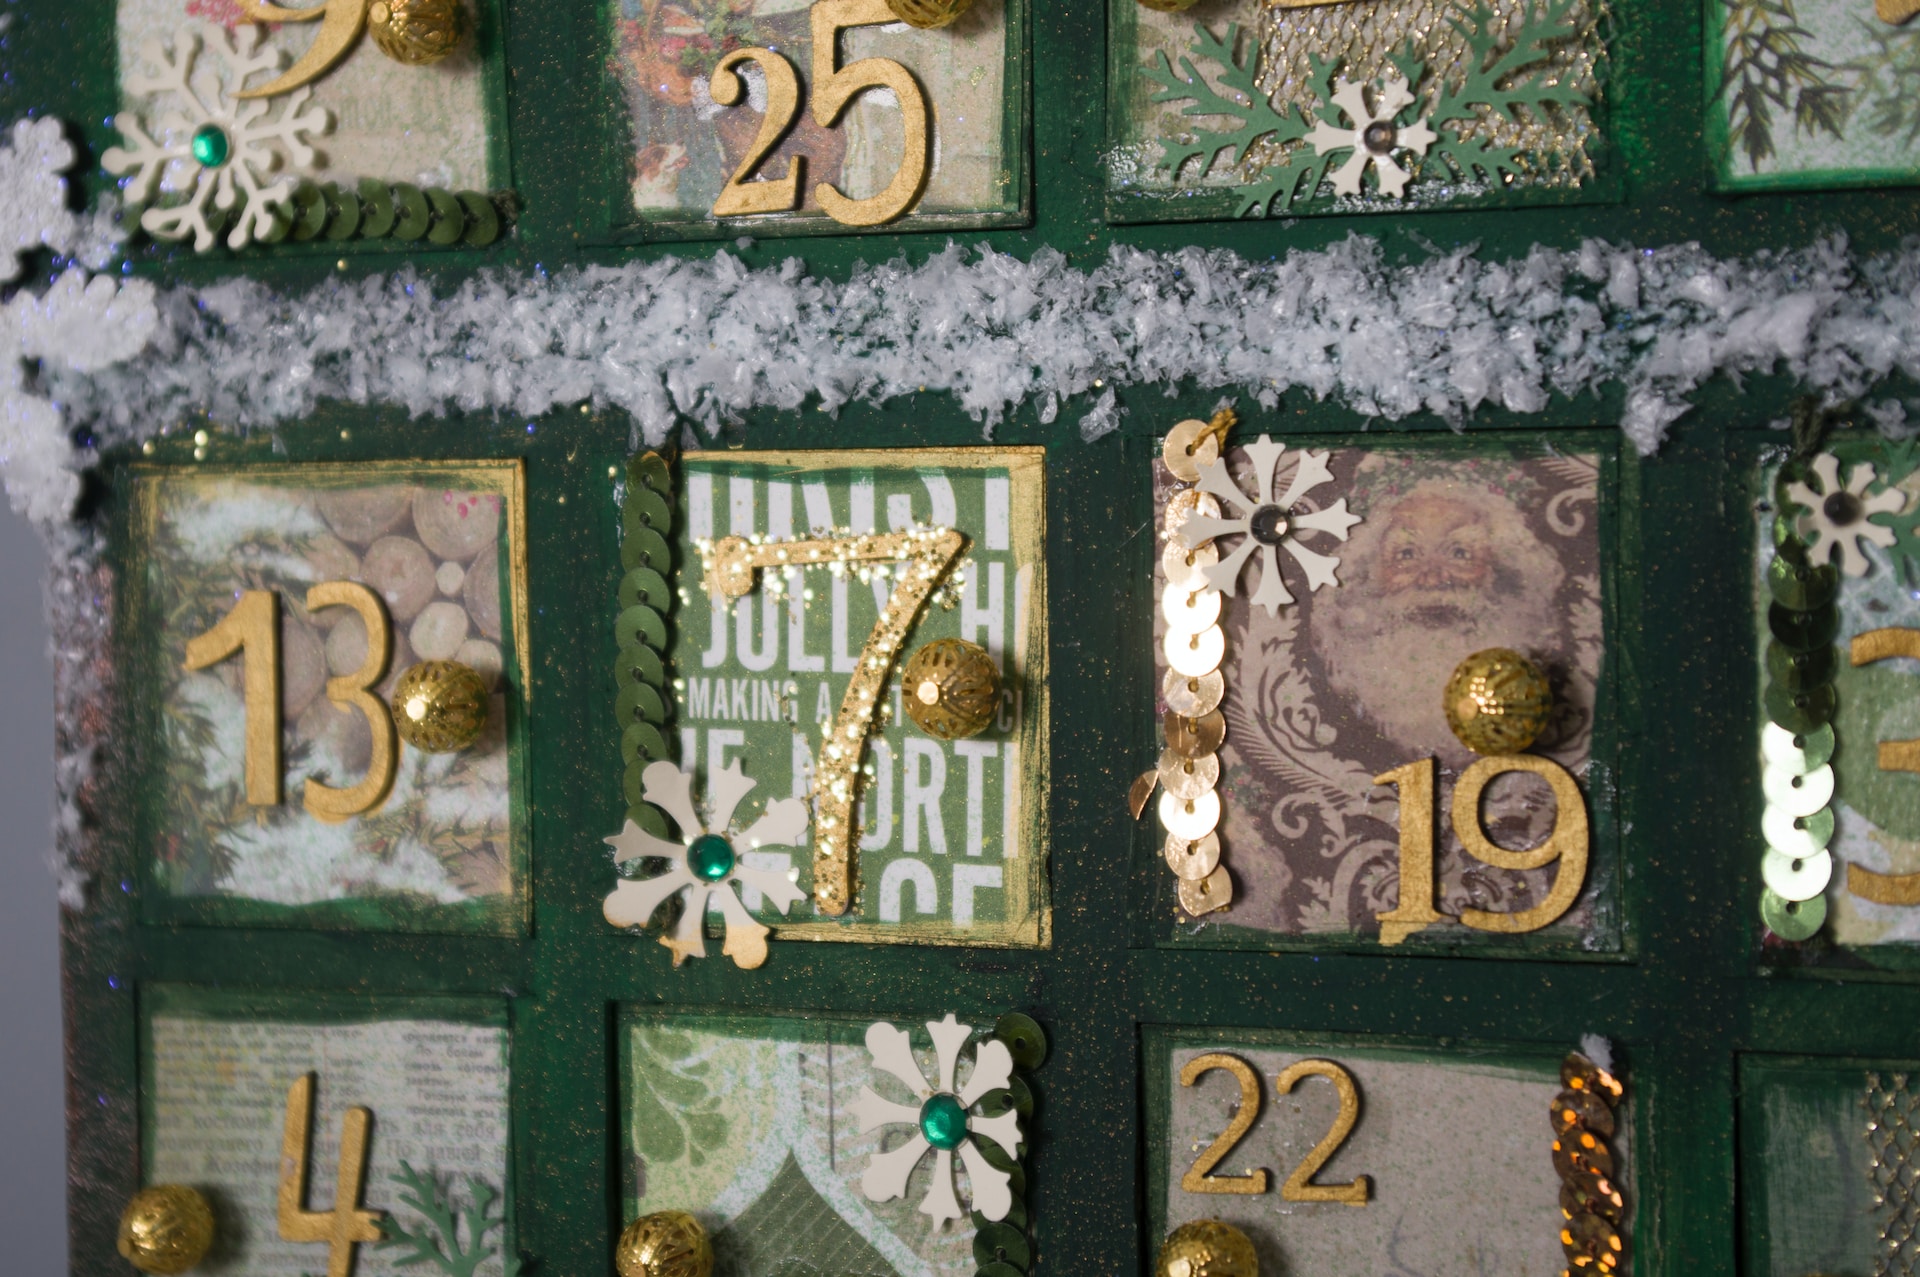 Advent calendar in Hungary is utilized to count the days until Christmas.